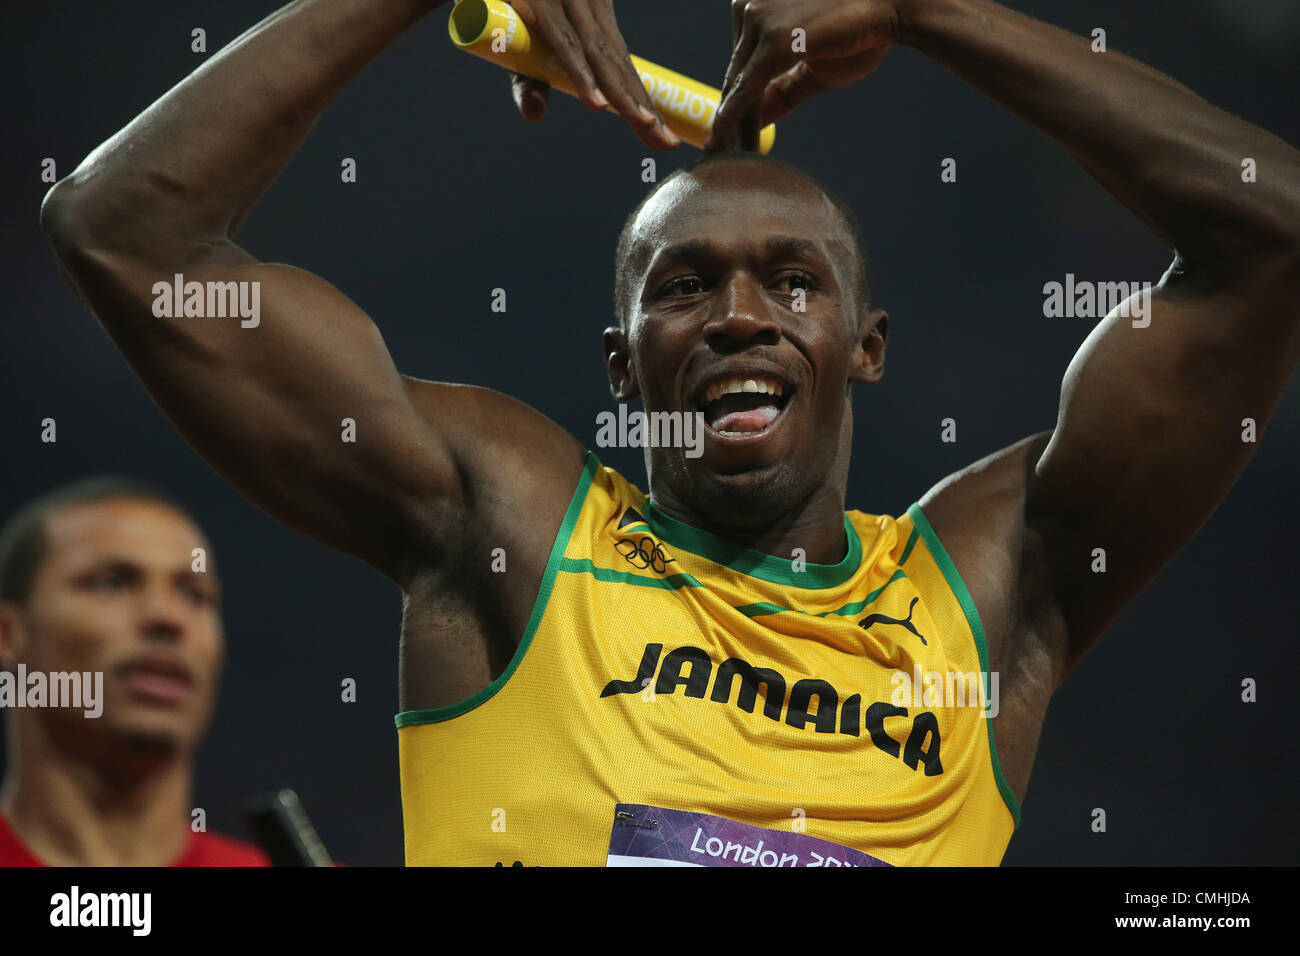 11.08.2012. London England. Usain Bolt of Jamaica celebrates after winning the Men's 4 x 100m Relay final of the  in Olympic Stadium at the London 2012 Olympic Games, London. Usain Bolt, anchoring the team helped the Jamaican team win the gold medal in 36.84 seconds setting a new world record. Stock Photo